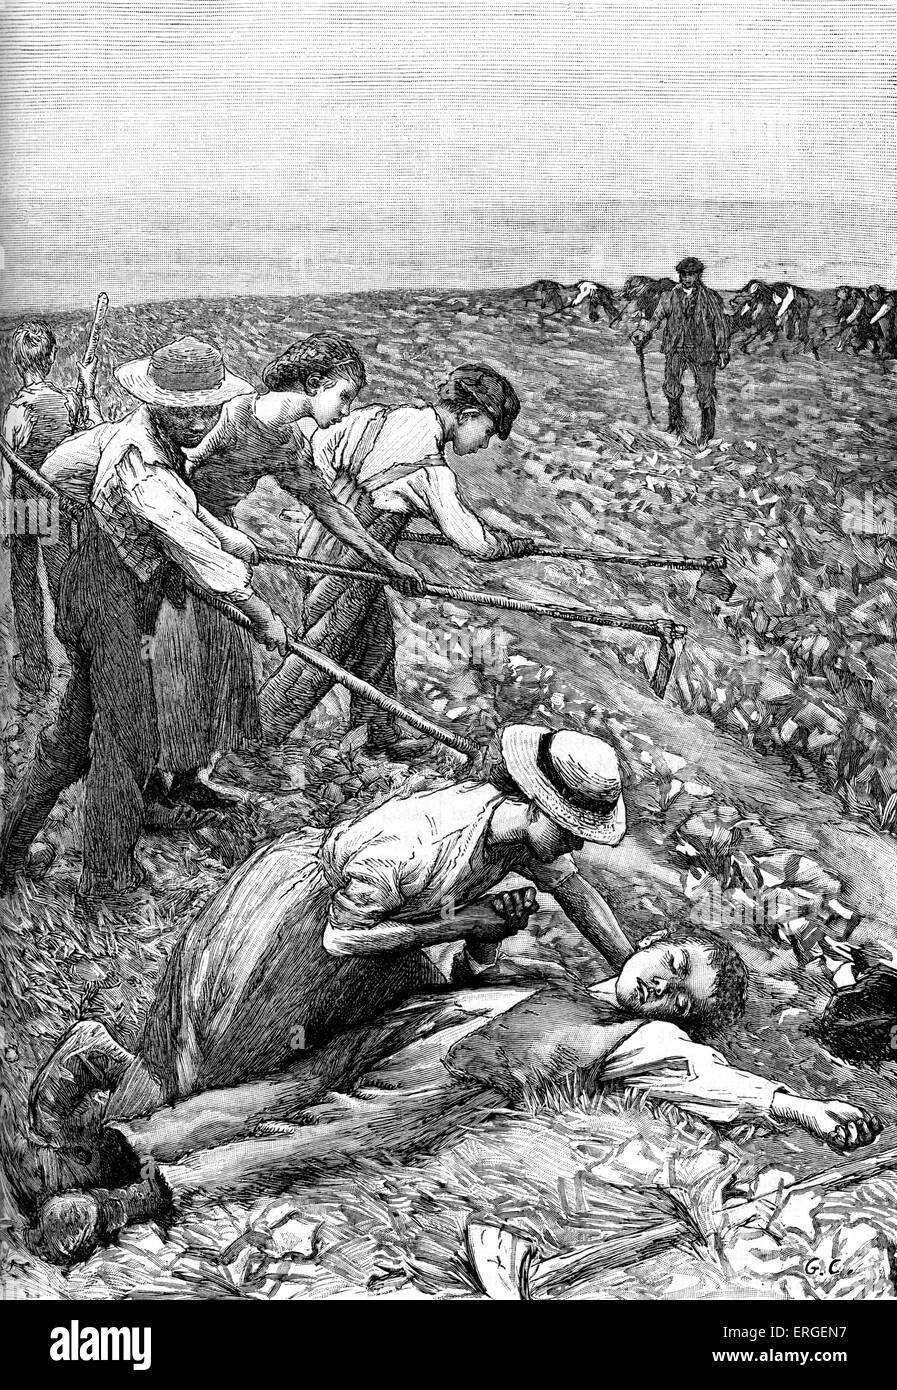 'Gang system' farming - late 19th century illustration. Division of slave labour used on plantations. Boy has fainted from Stock Photo